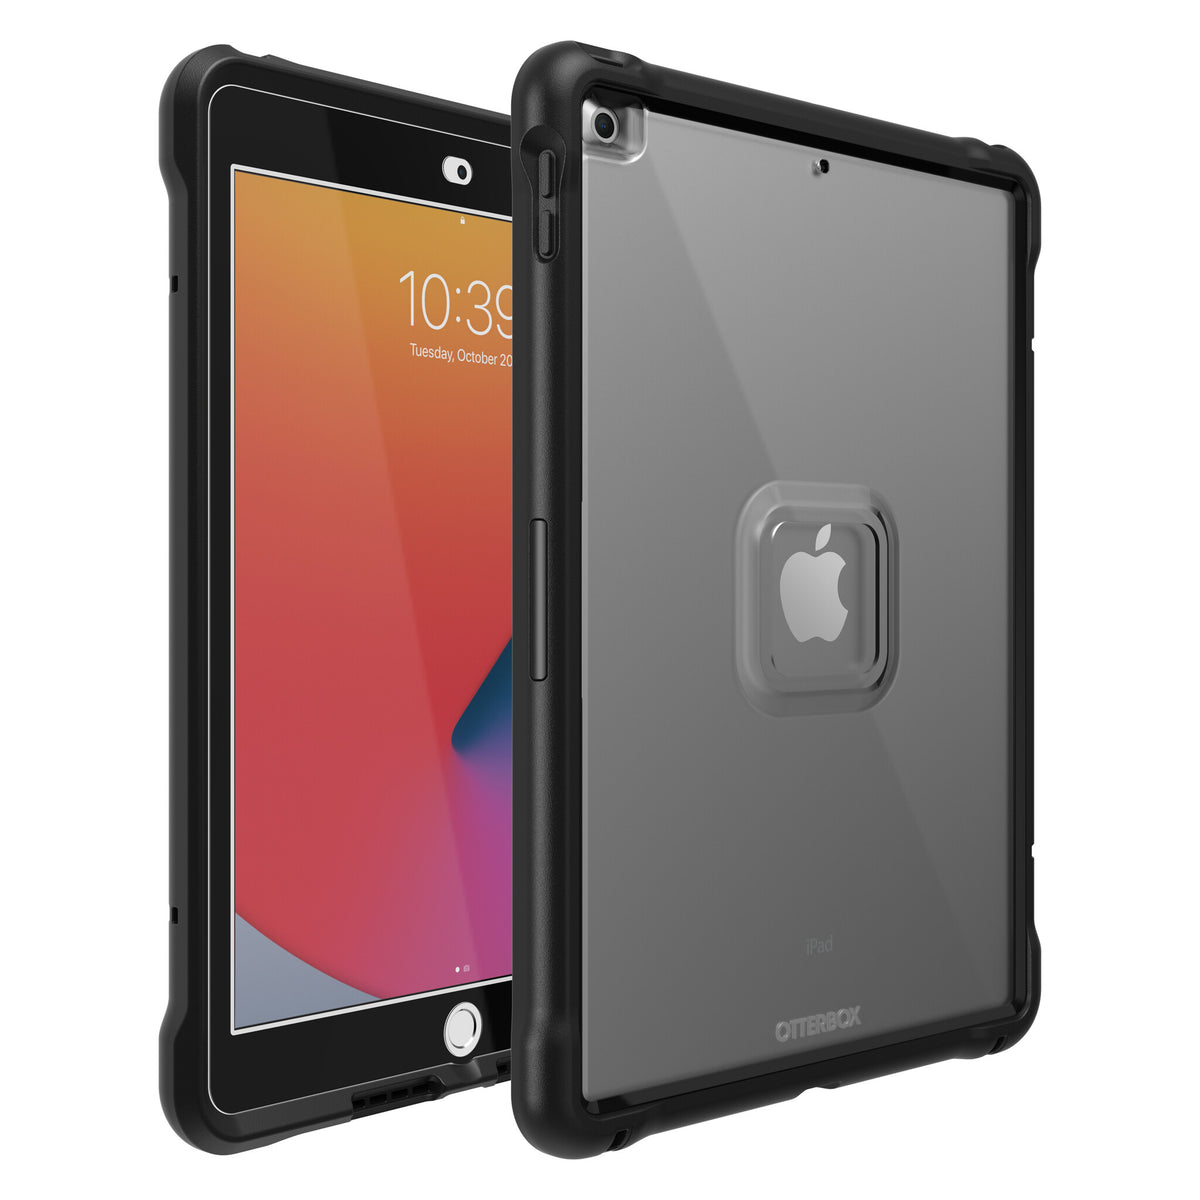 OtterBox UnlimitED Kickstand Case for 10.2&quot; iPad in Black / Transparent - No Packaging